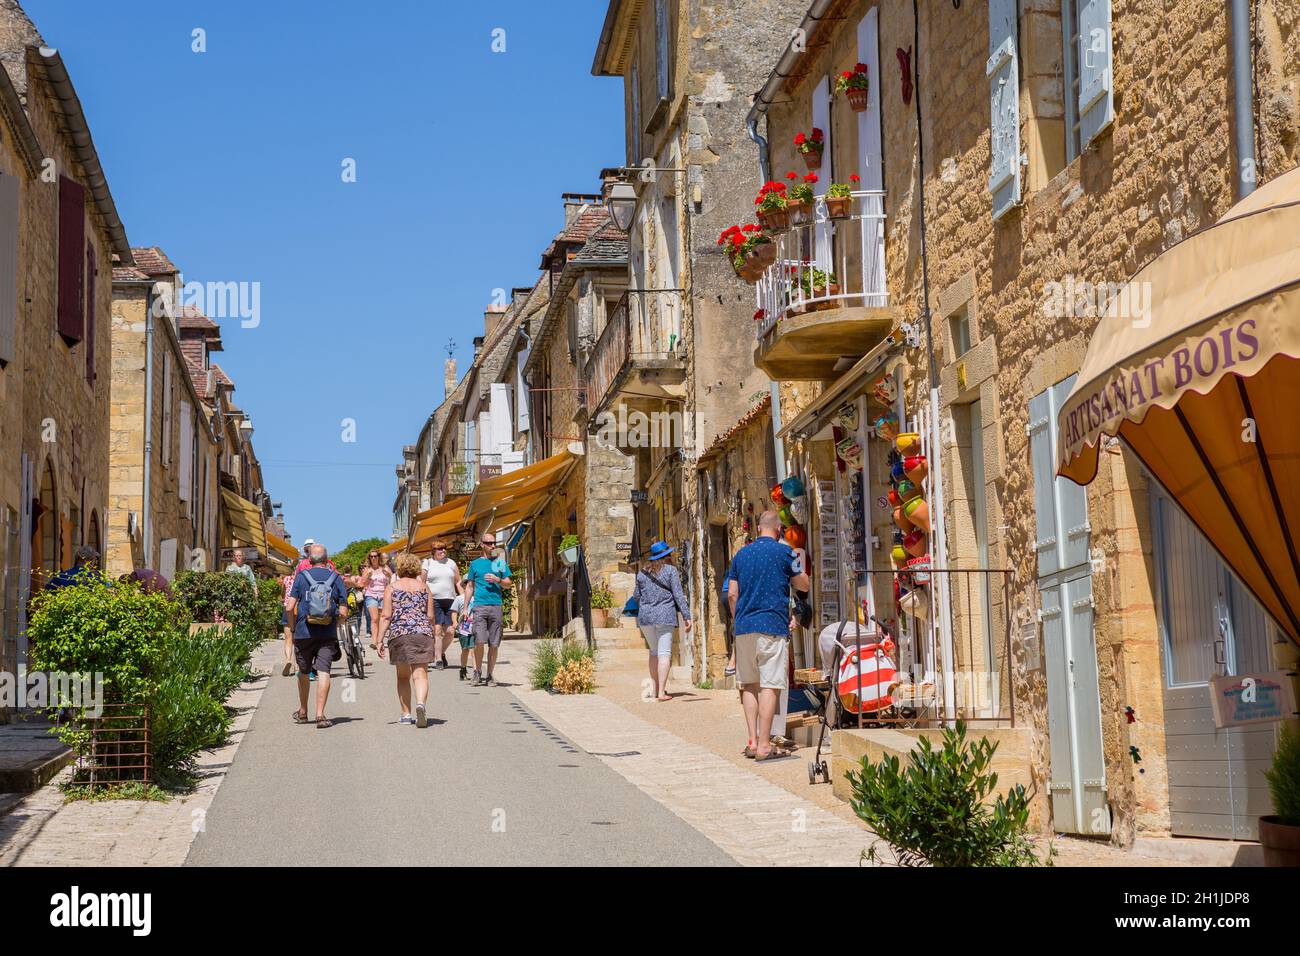 Domme, France - August 14, 2019:Tourists visiting the medieval town of Domme in the Dordogne France Stock Photo